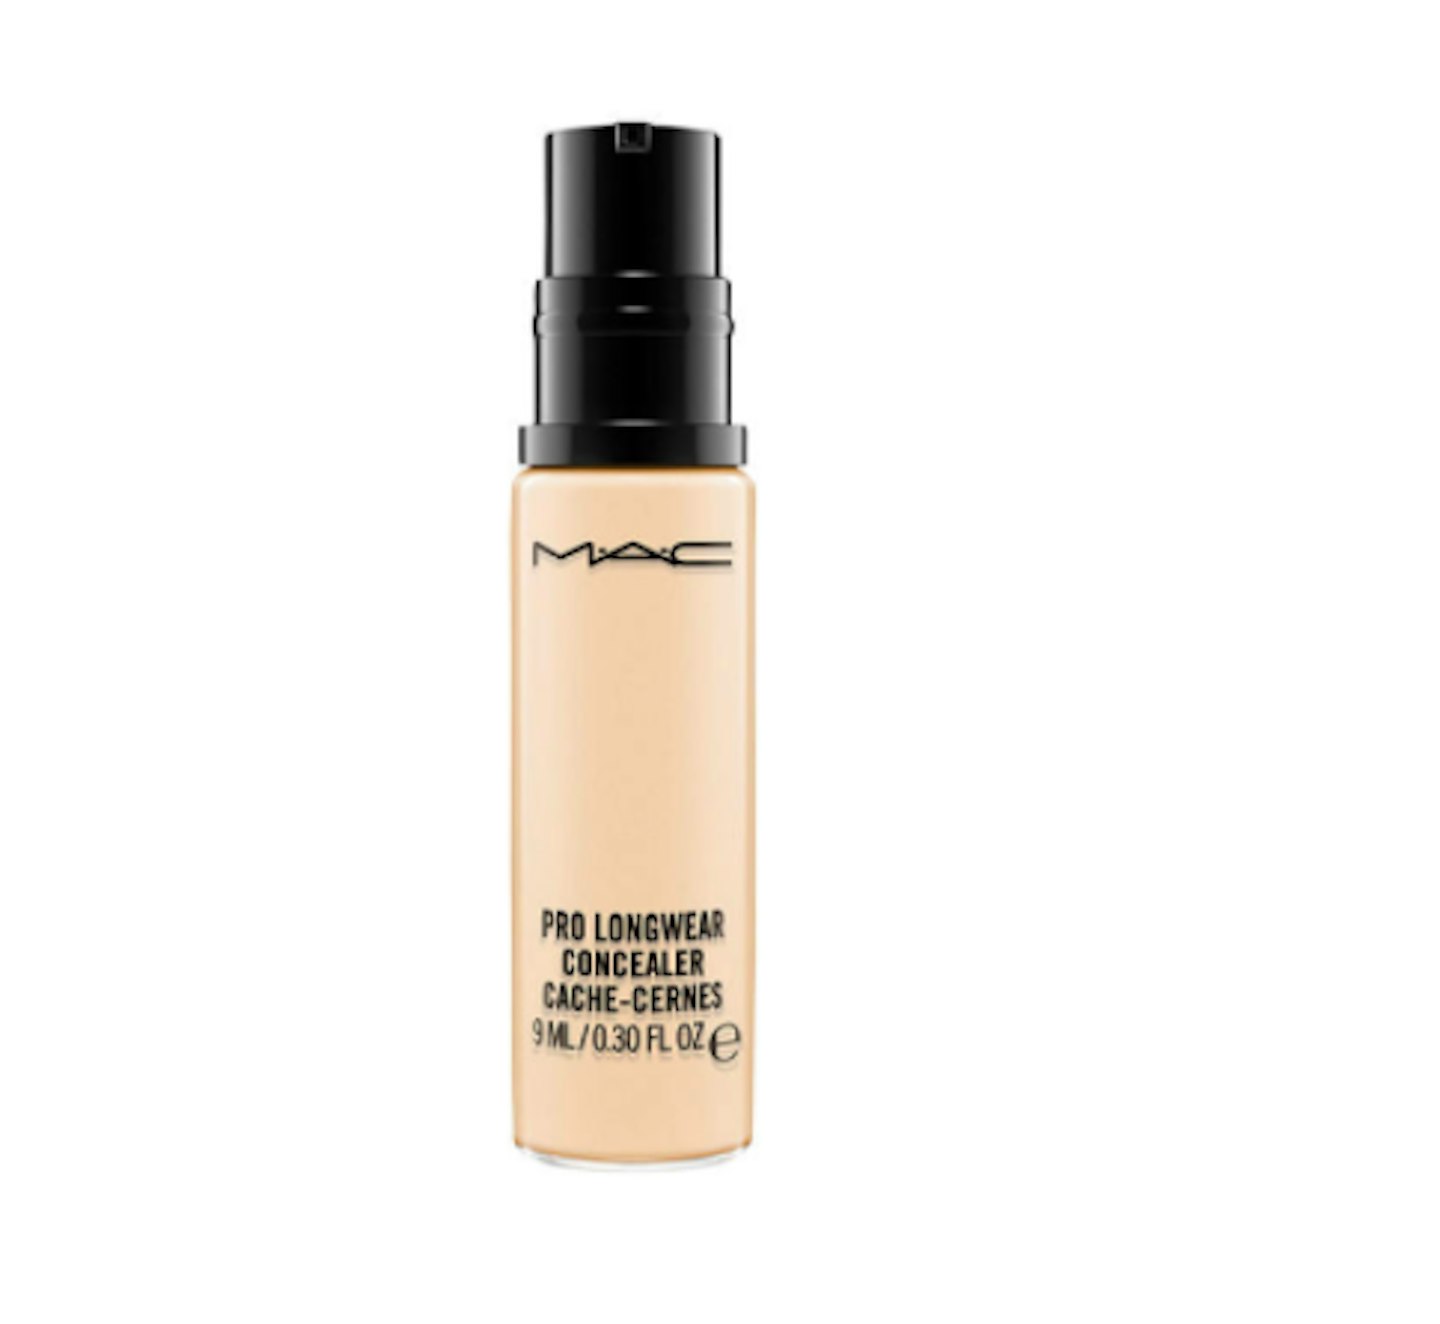 A picture of the MAC Pro Longwear Concealer